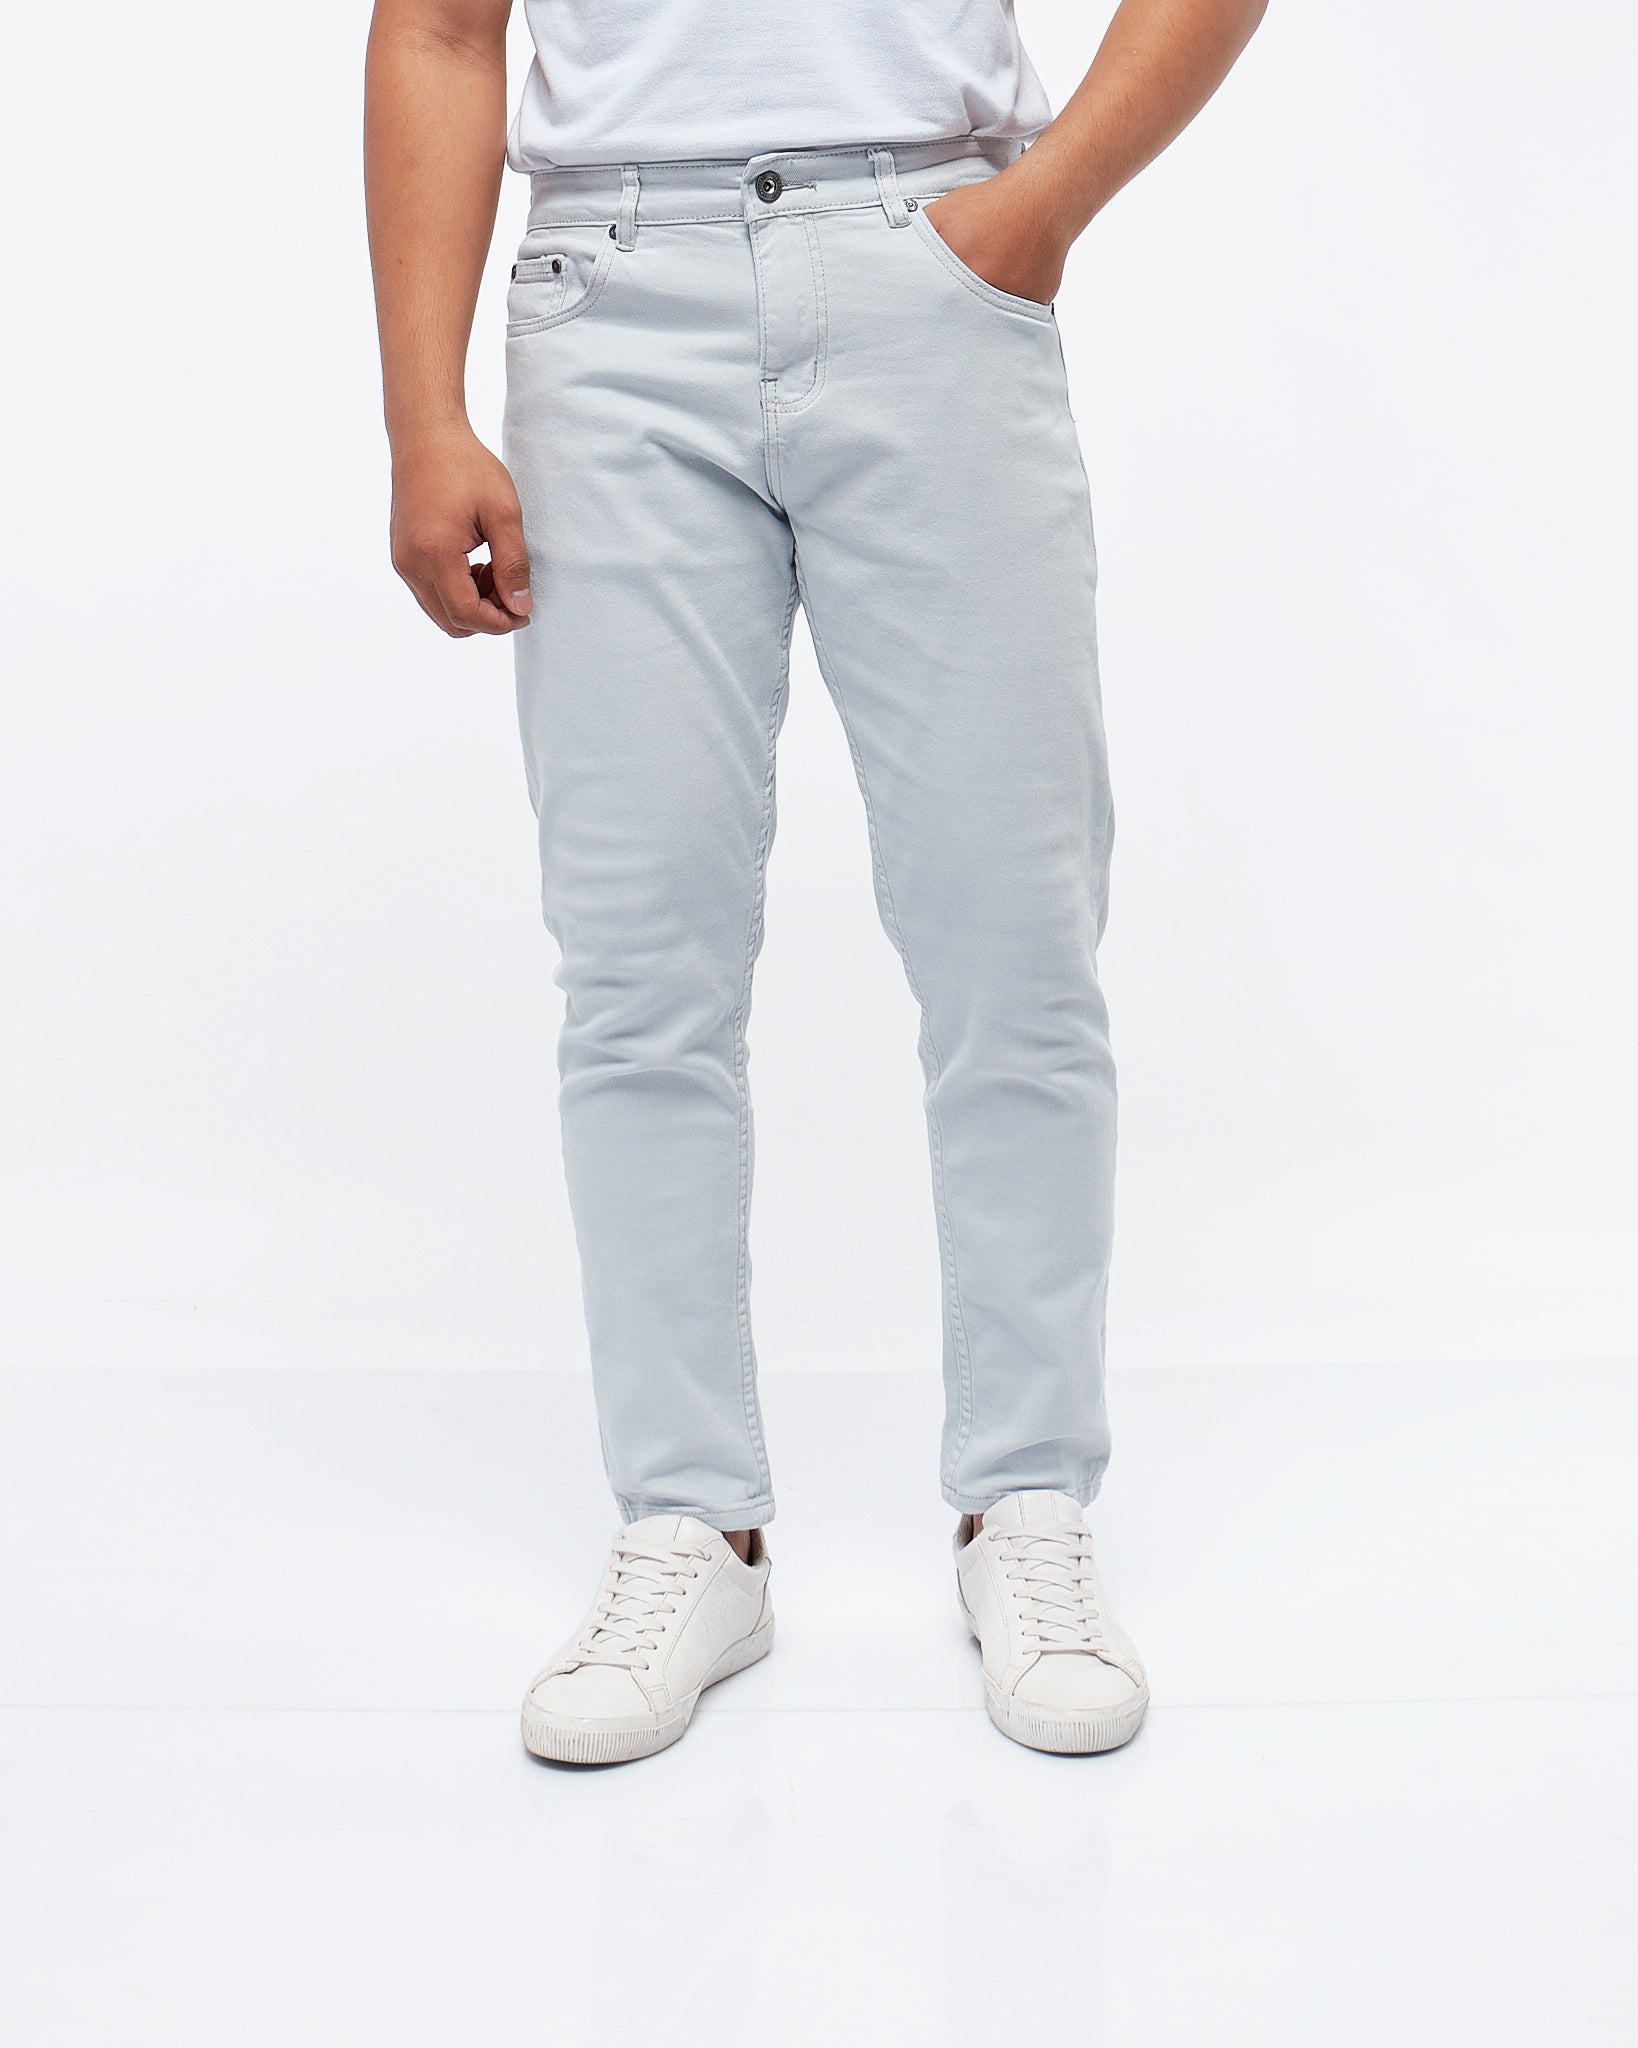 MOI OUTFIT-TB Logo Embroidered Back Pocket Men Jeans 25.90